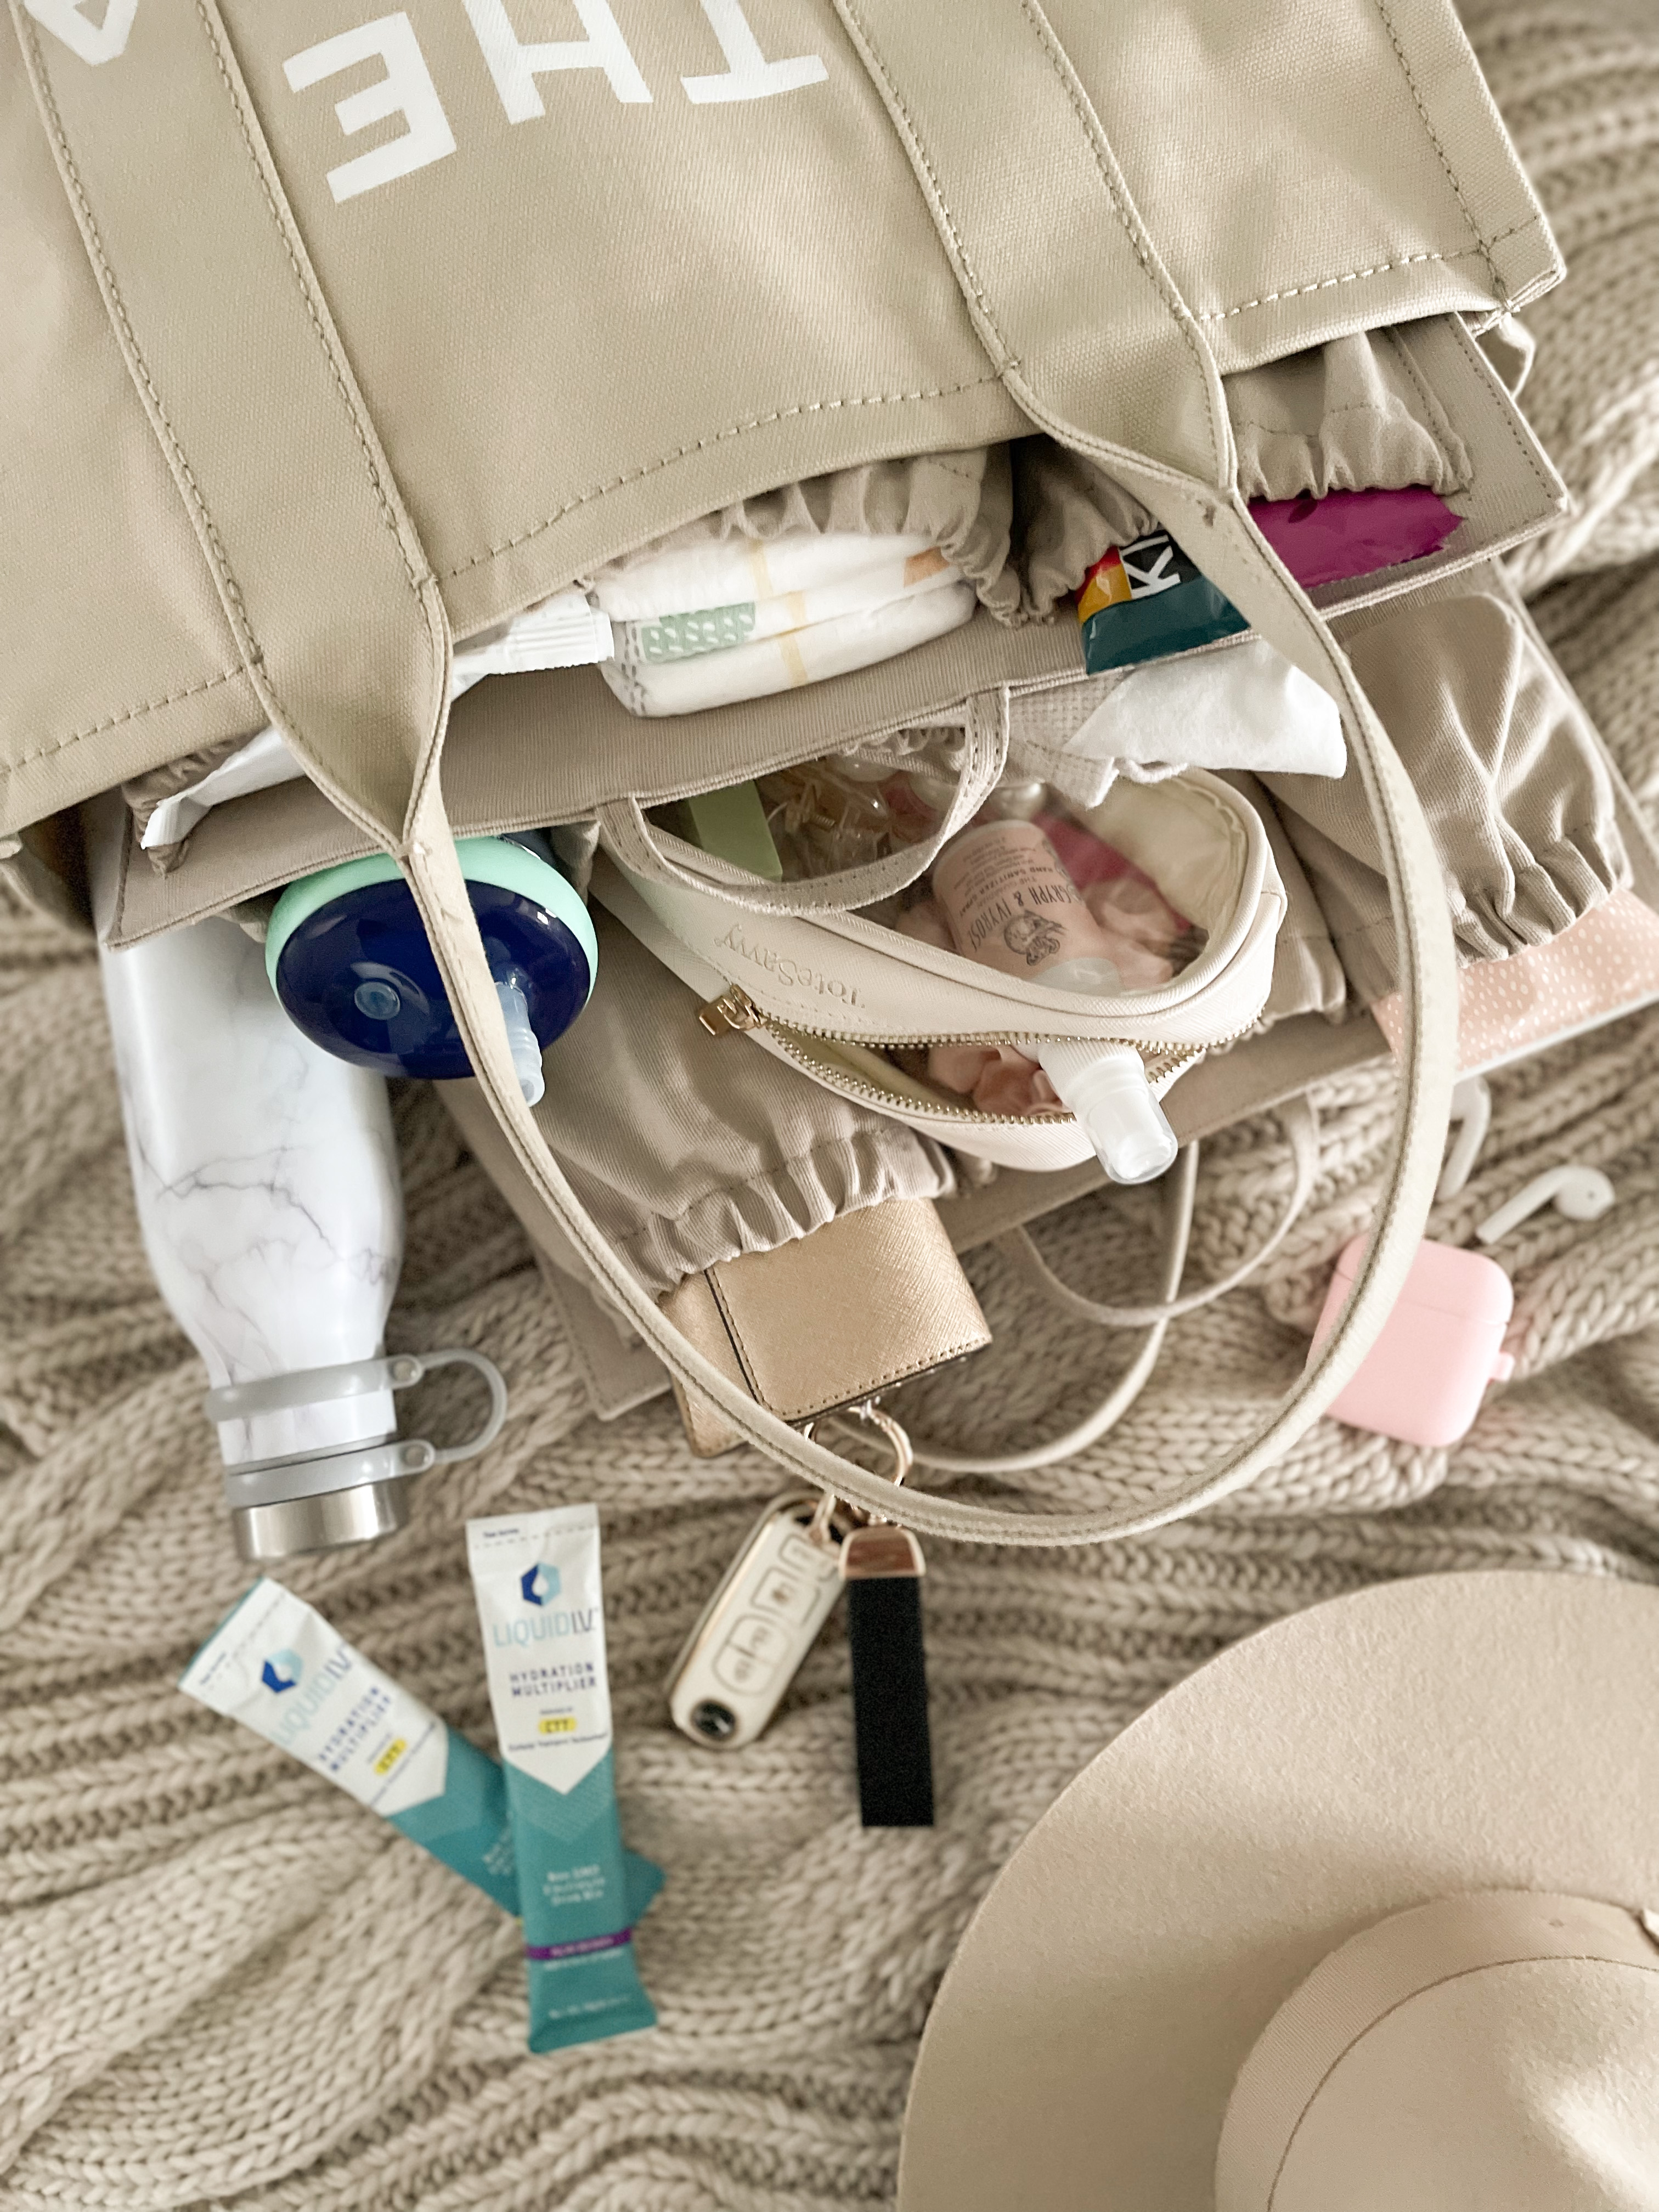 Purse Organization With Pouches - Organizing Moms